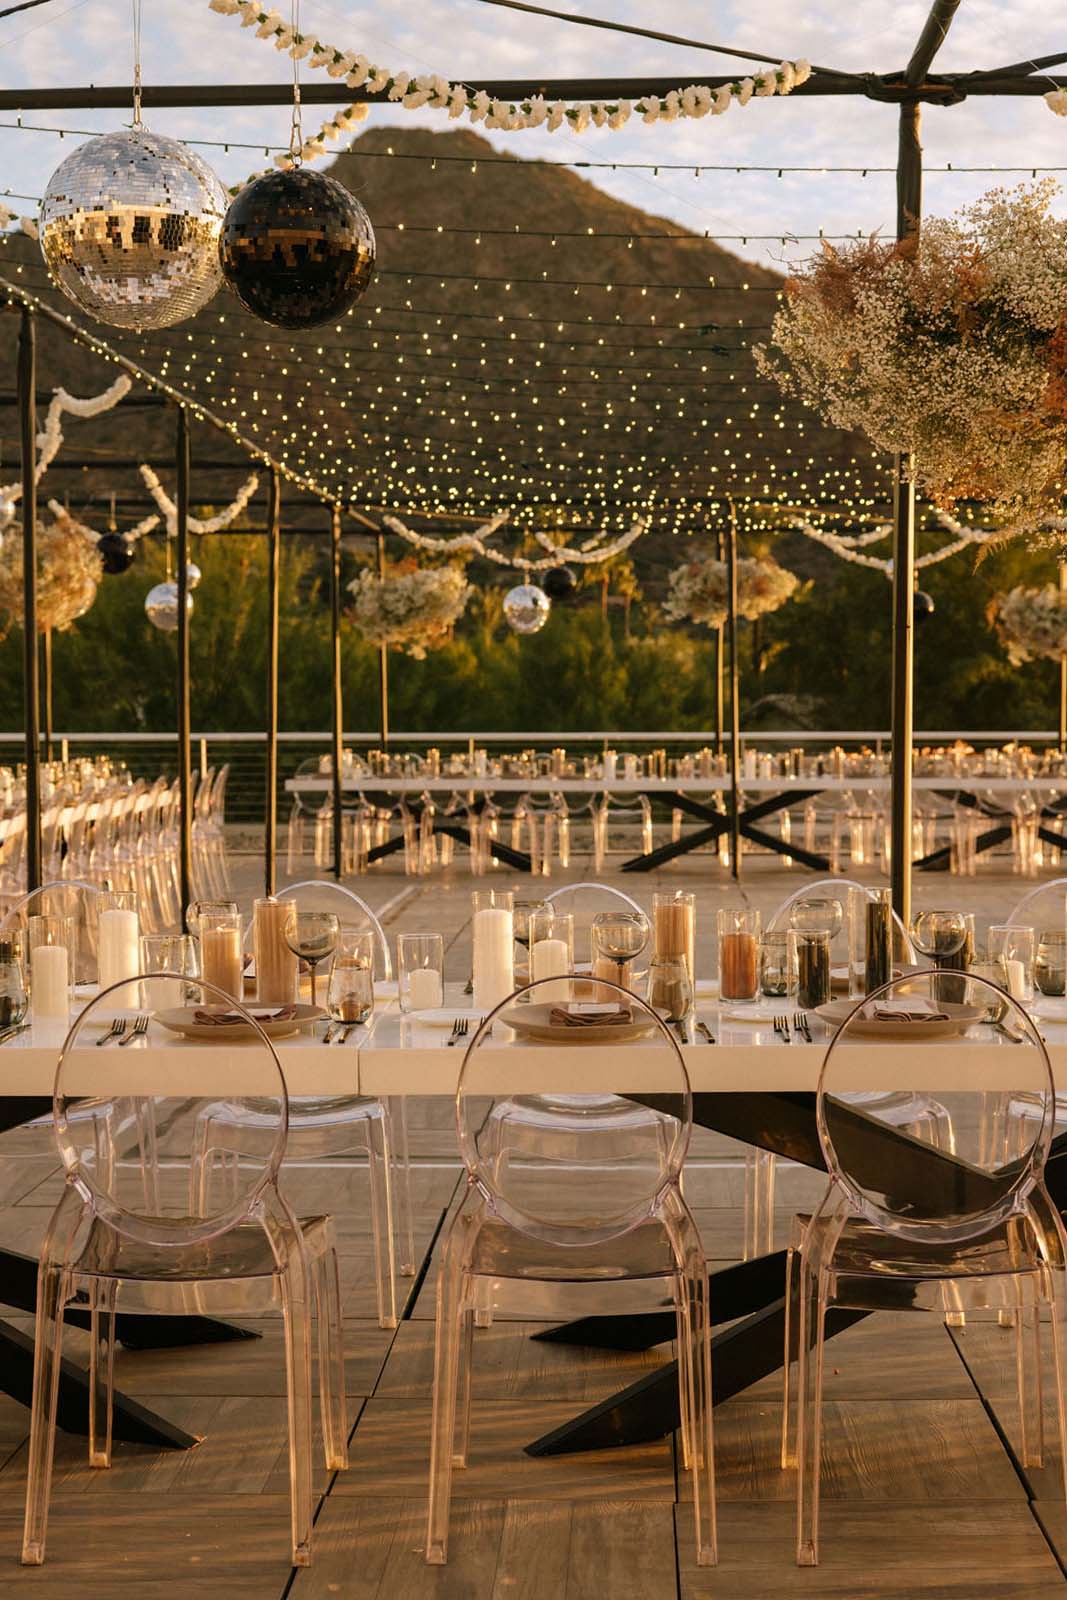 The outdoor wedding table is adorned with candles, and elegant place settings, while a sparkling disco ball overhead adds a touch of playful glamour to the scene.